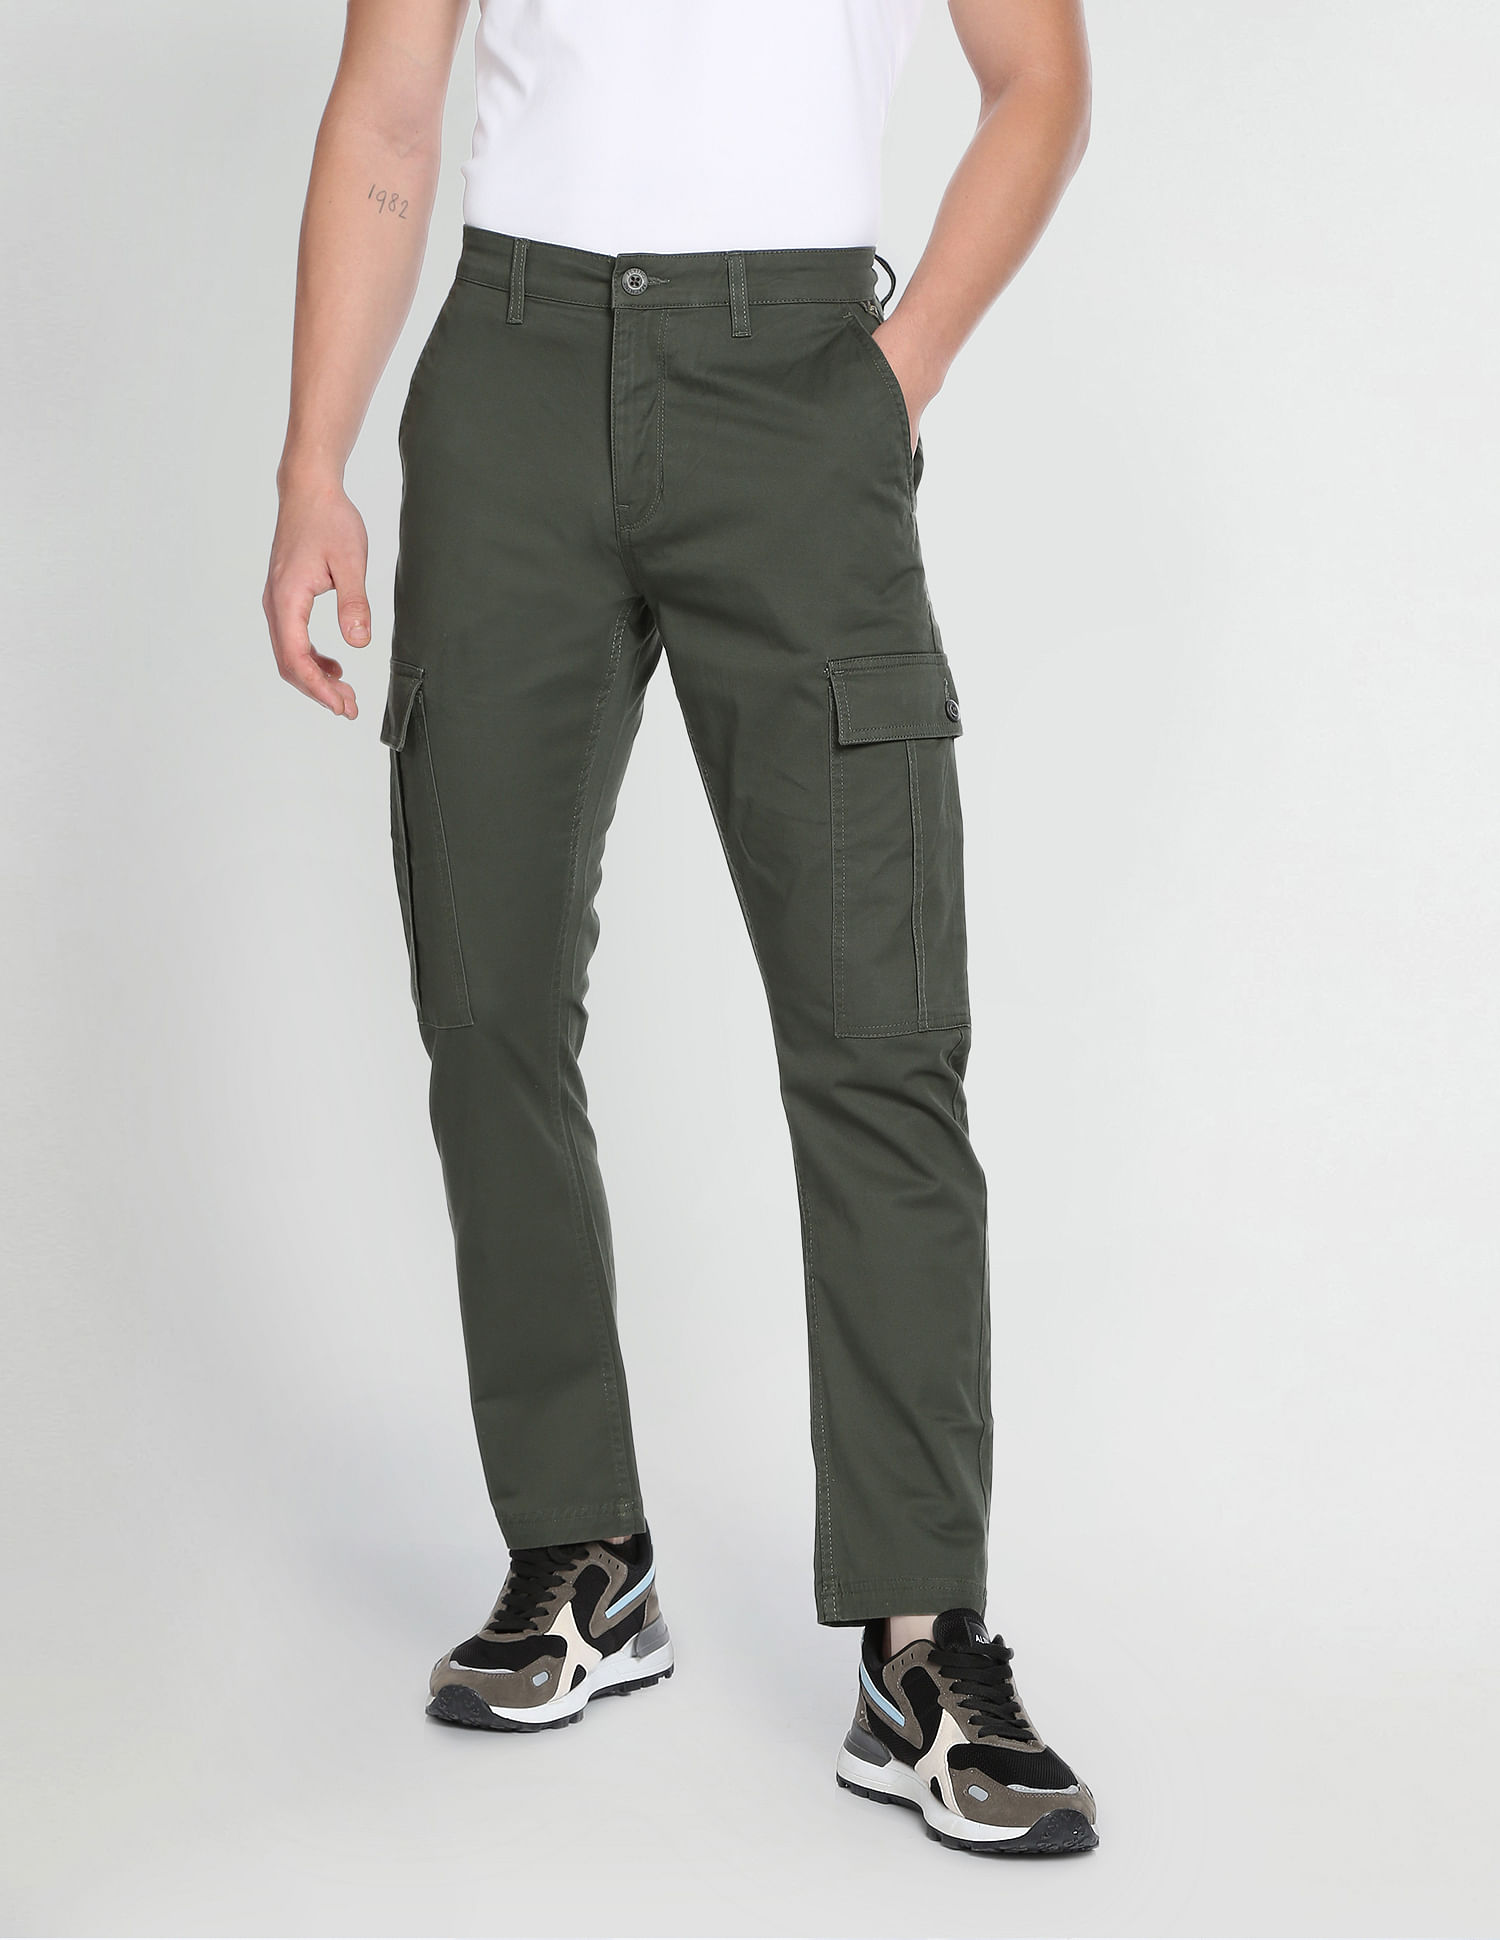 Cargo Pants Men Solid Color Black Loose Casual Jogger Pocket Elastic waist  Ankle Length Trousers at Rs 2908.99/piece | Men Cargo Pant | ID:  2851438511988